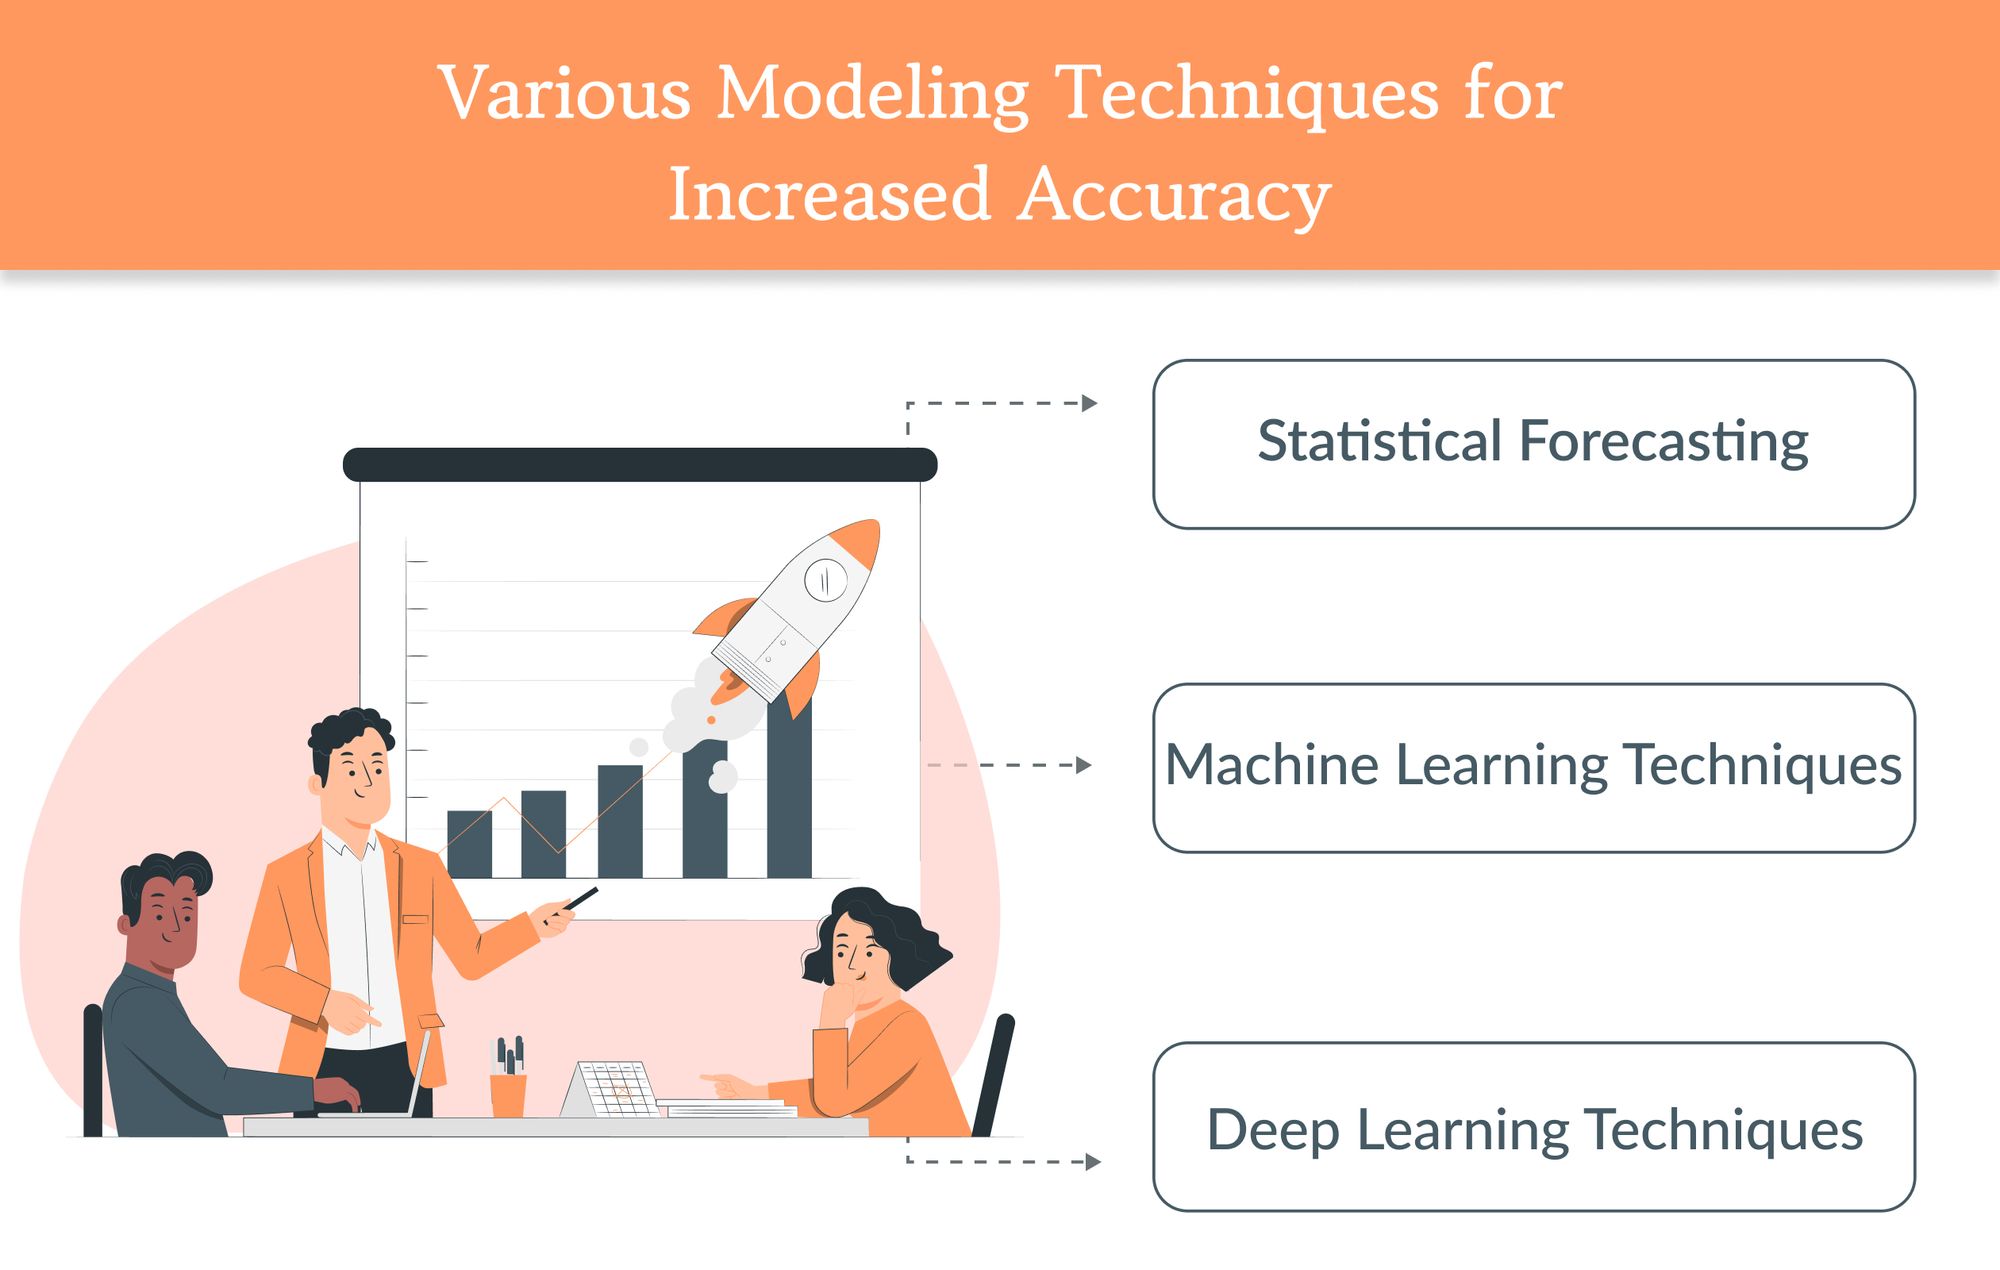 Various Modeling Techniques for Increased Accuracy